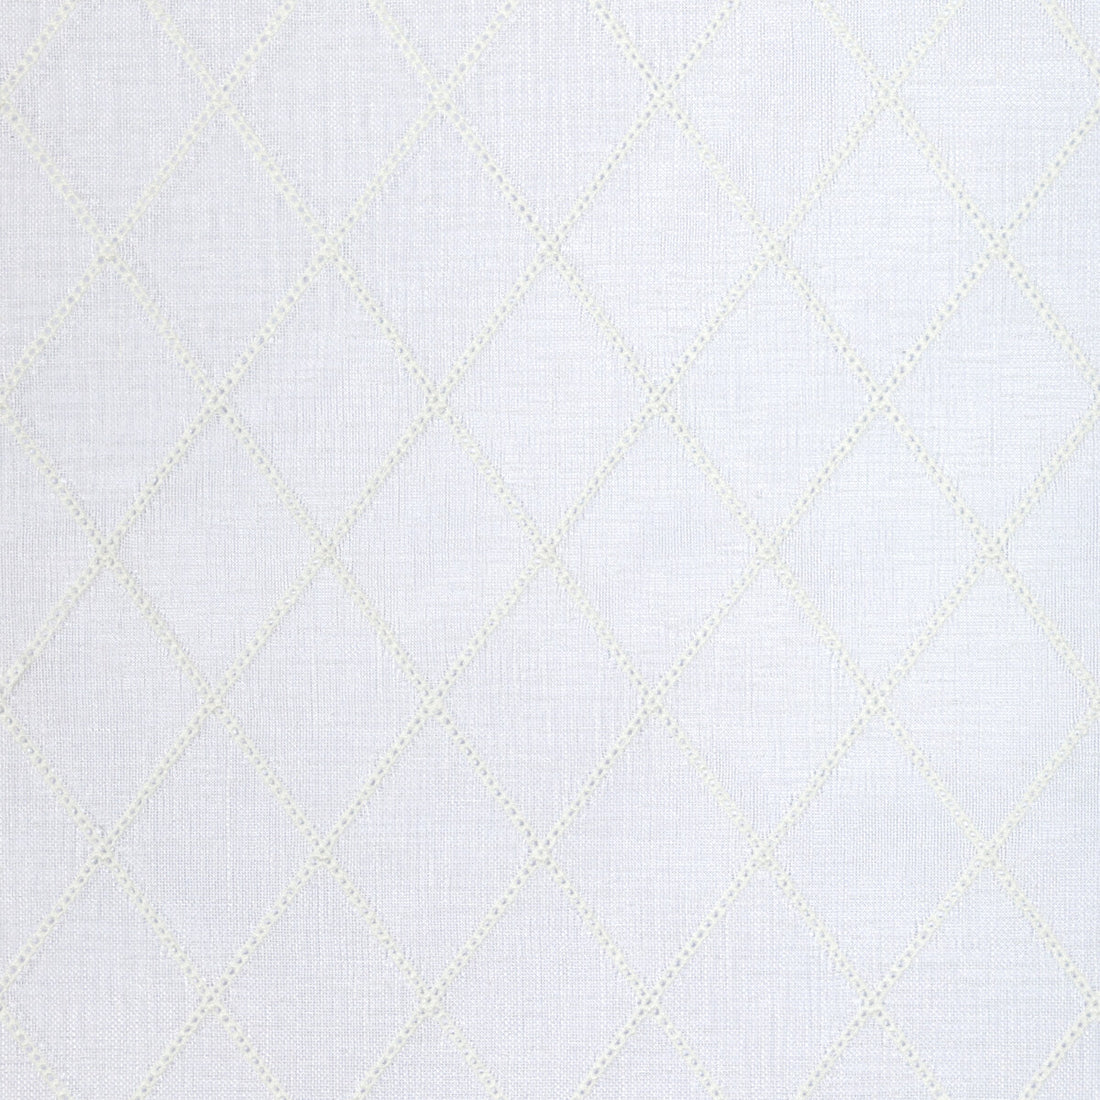 Hammonds Sheer fabric in ivory color - pattern 2021115.1116.0 - by Lee Jofa in the Summerland collection